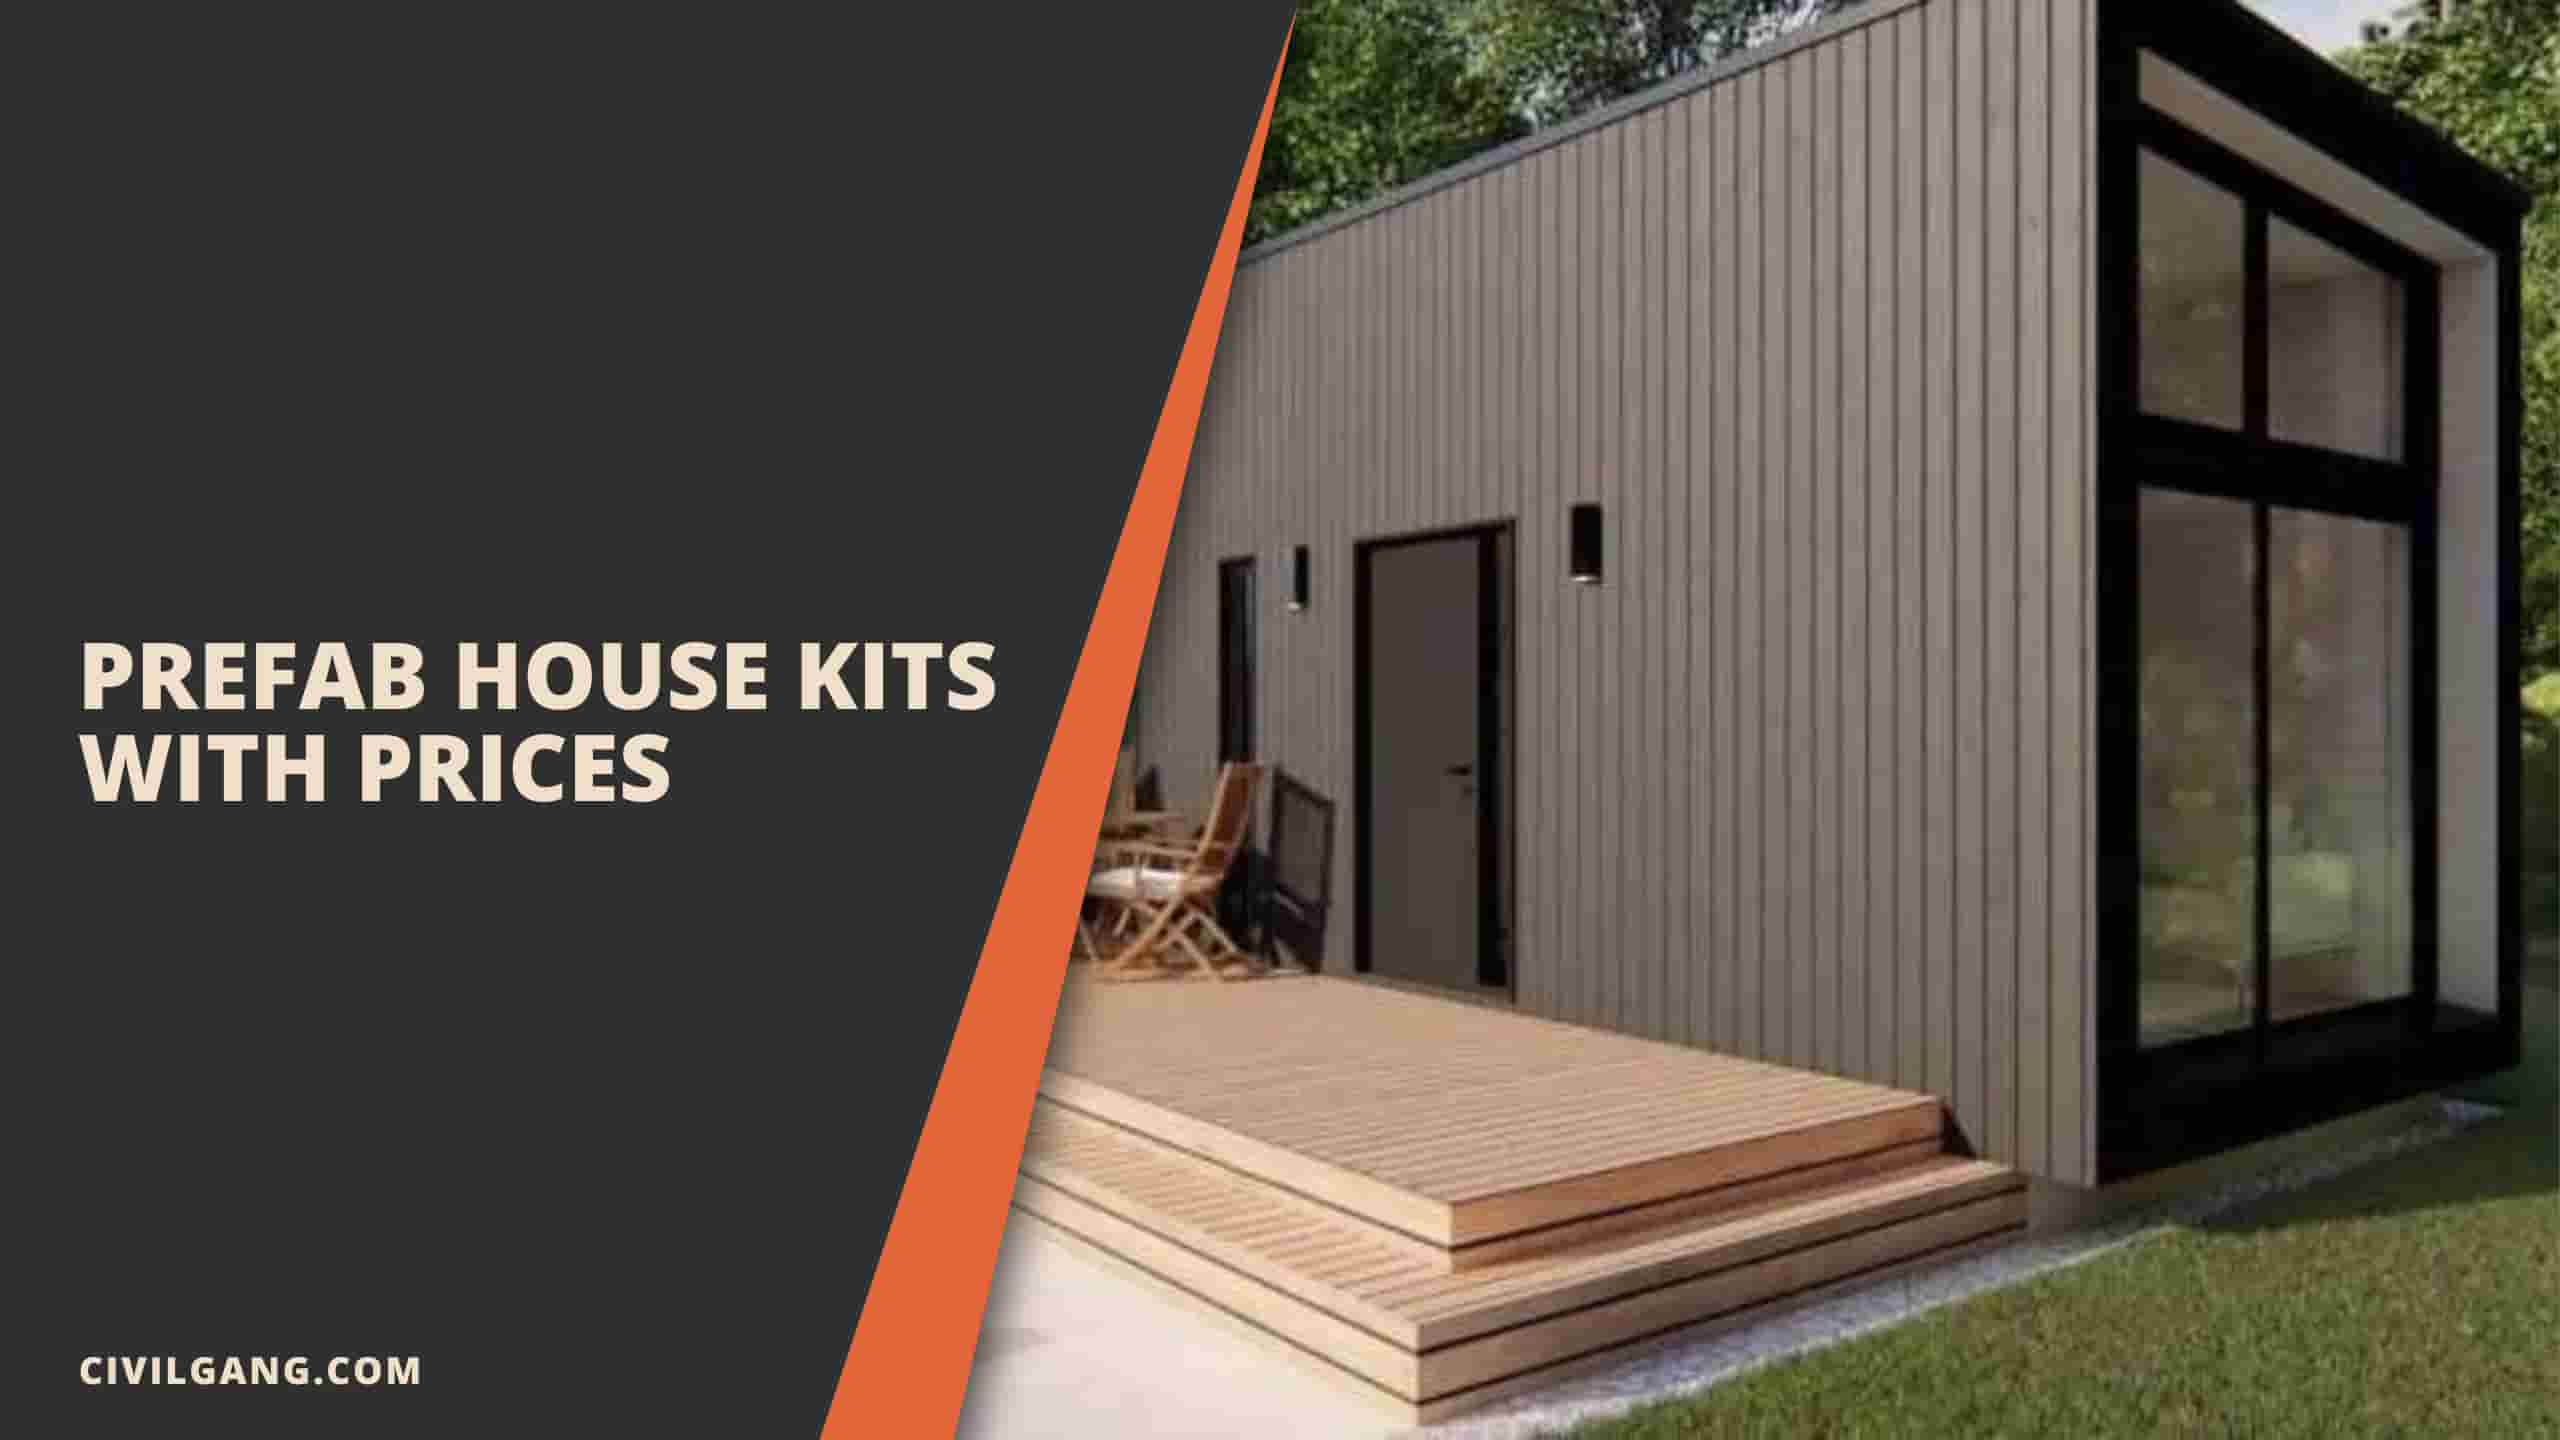 Prefab House Kits With Prices